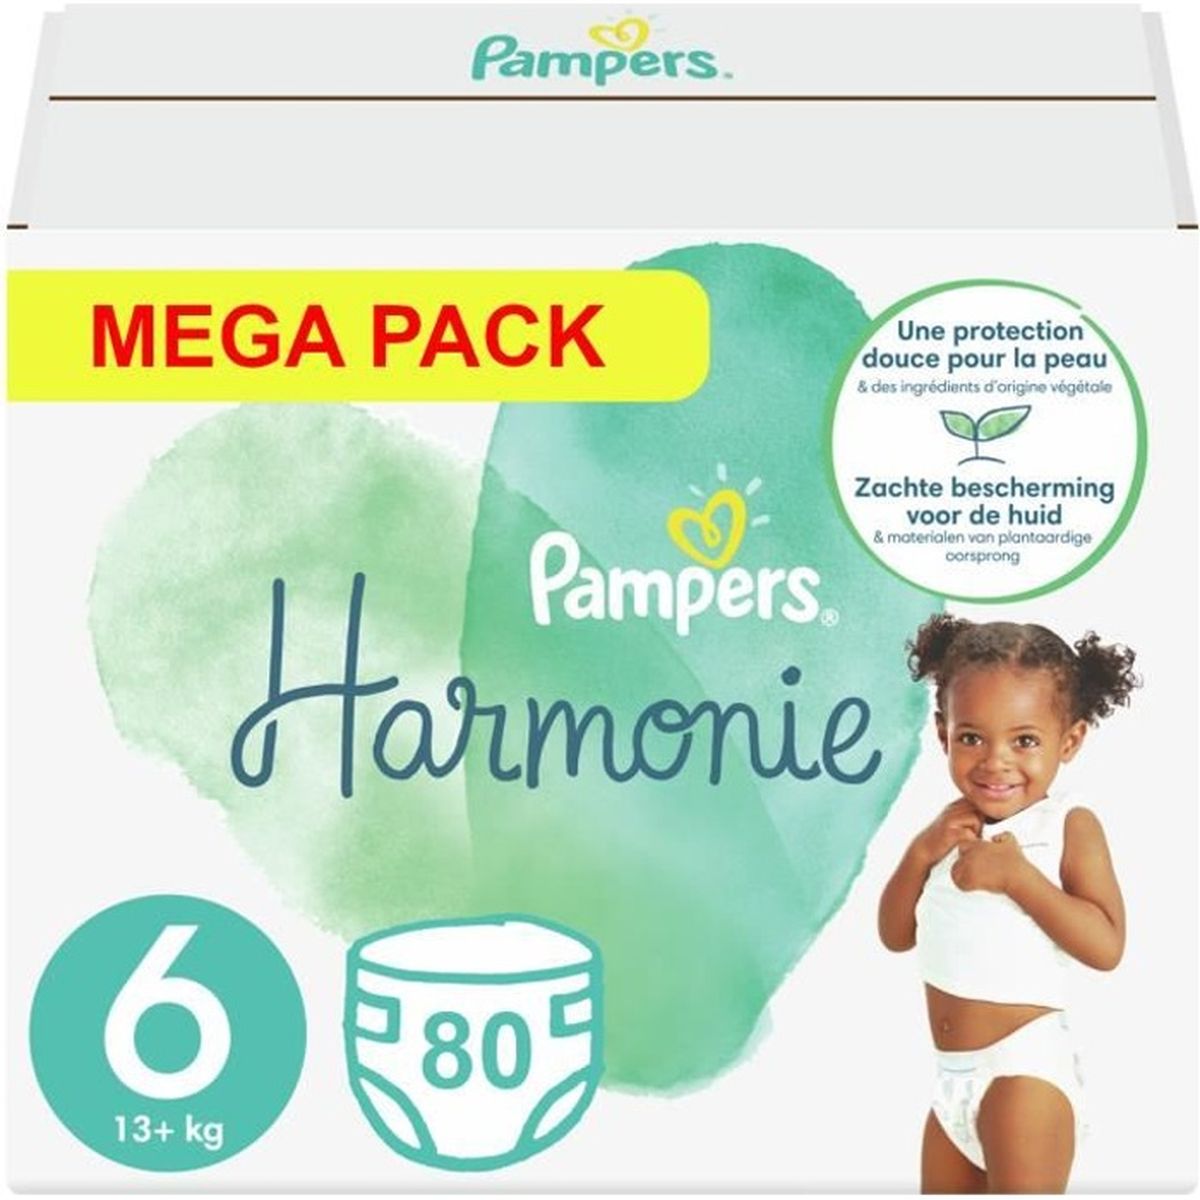 Lot 124 couches Pampers HARMONIE PANTS taille 5 (12-17 kg)